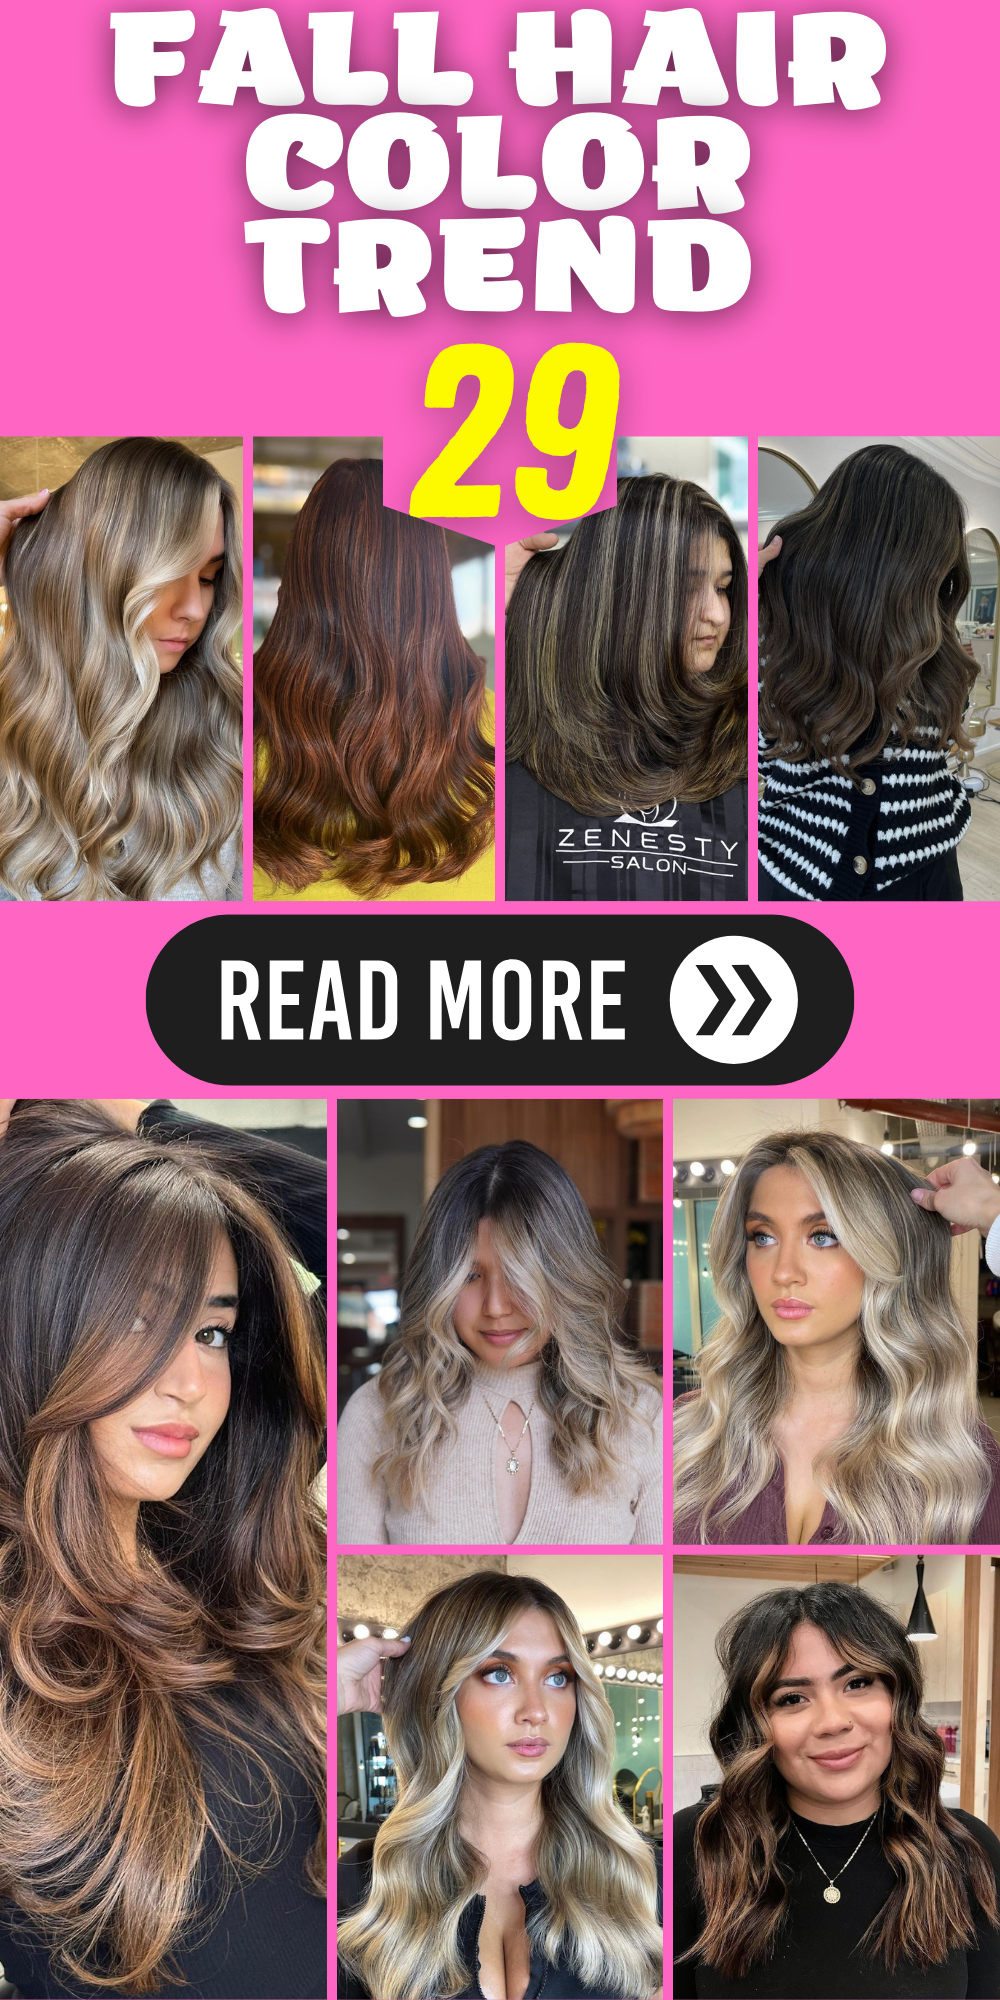 Fall Hair Color Trend: 29 Fresh Ideas to Transform Your Look